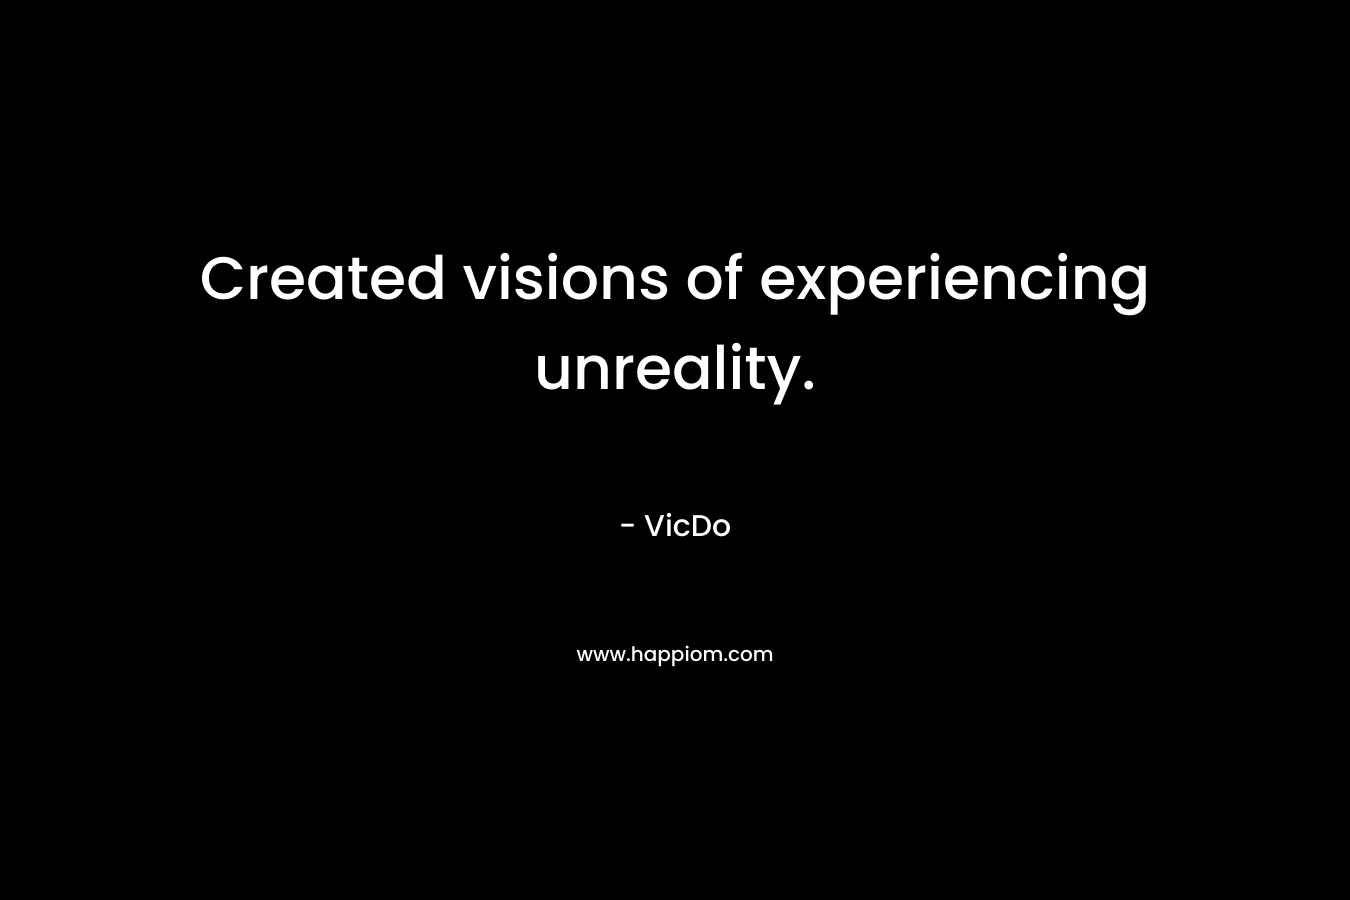 Created visions of experiencing unreality.